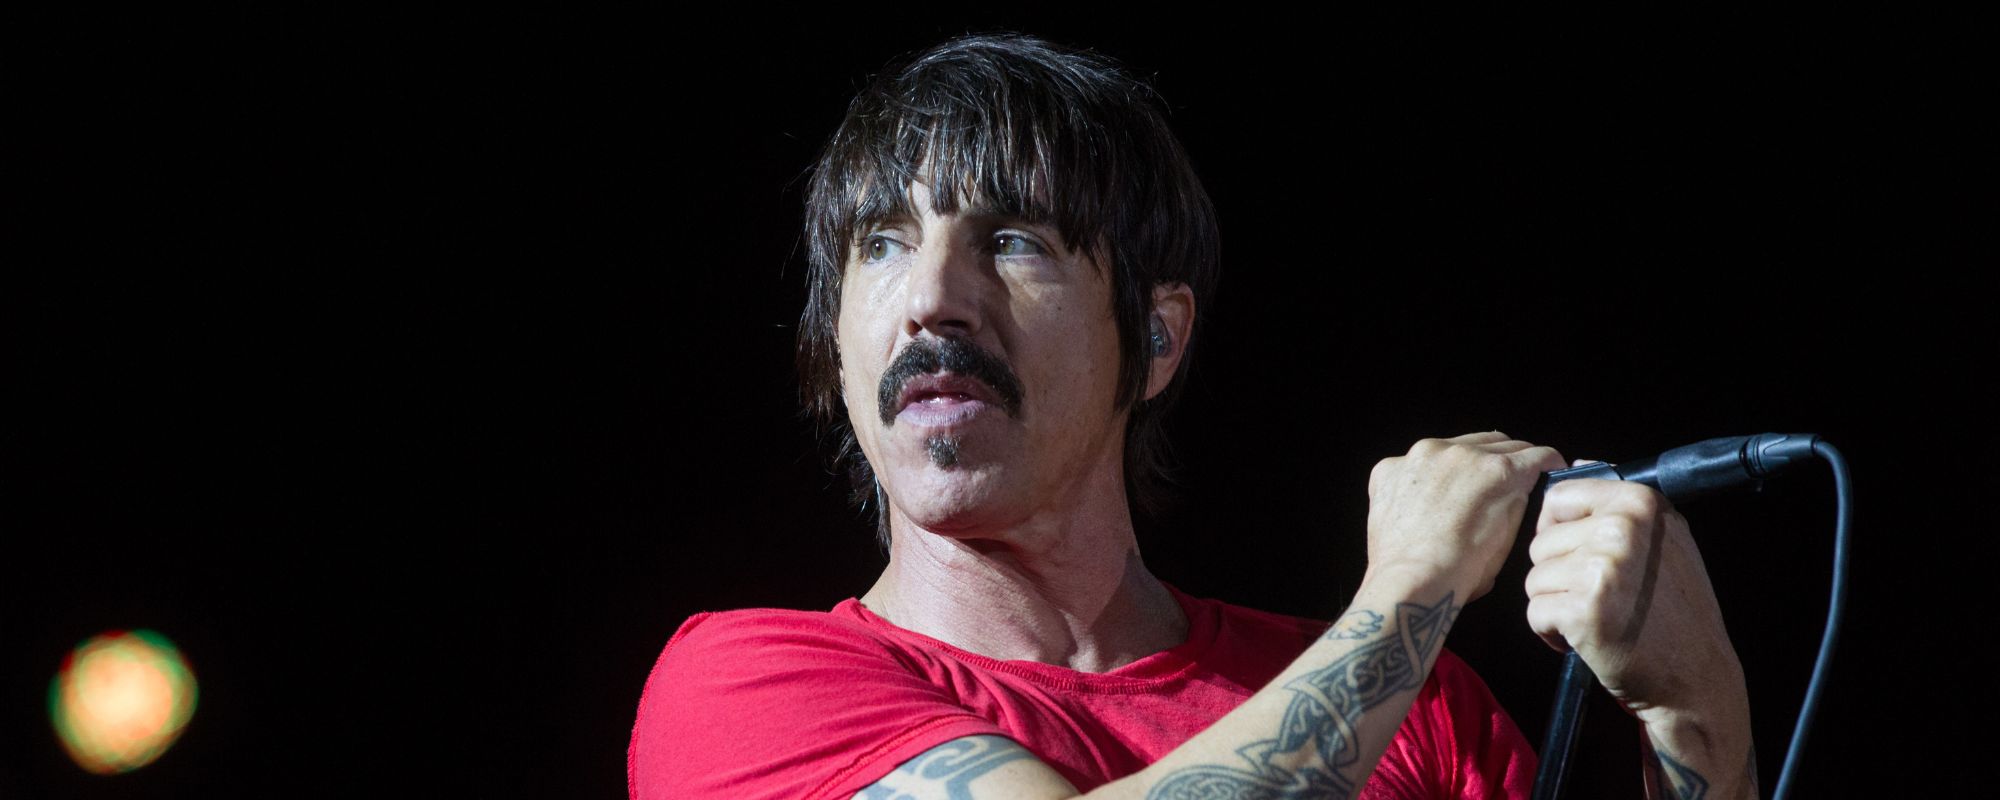 Global Citizen Fest Announces Headliners Red Hot Chili Peppers, Ms. Lauryn Hill